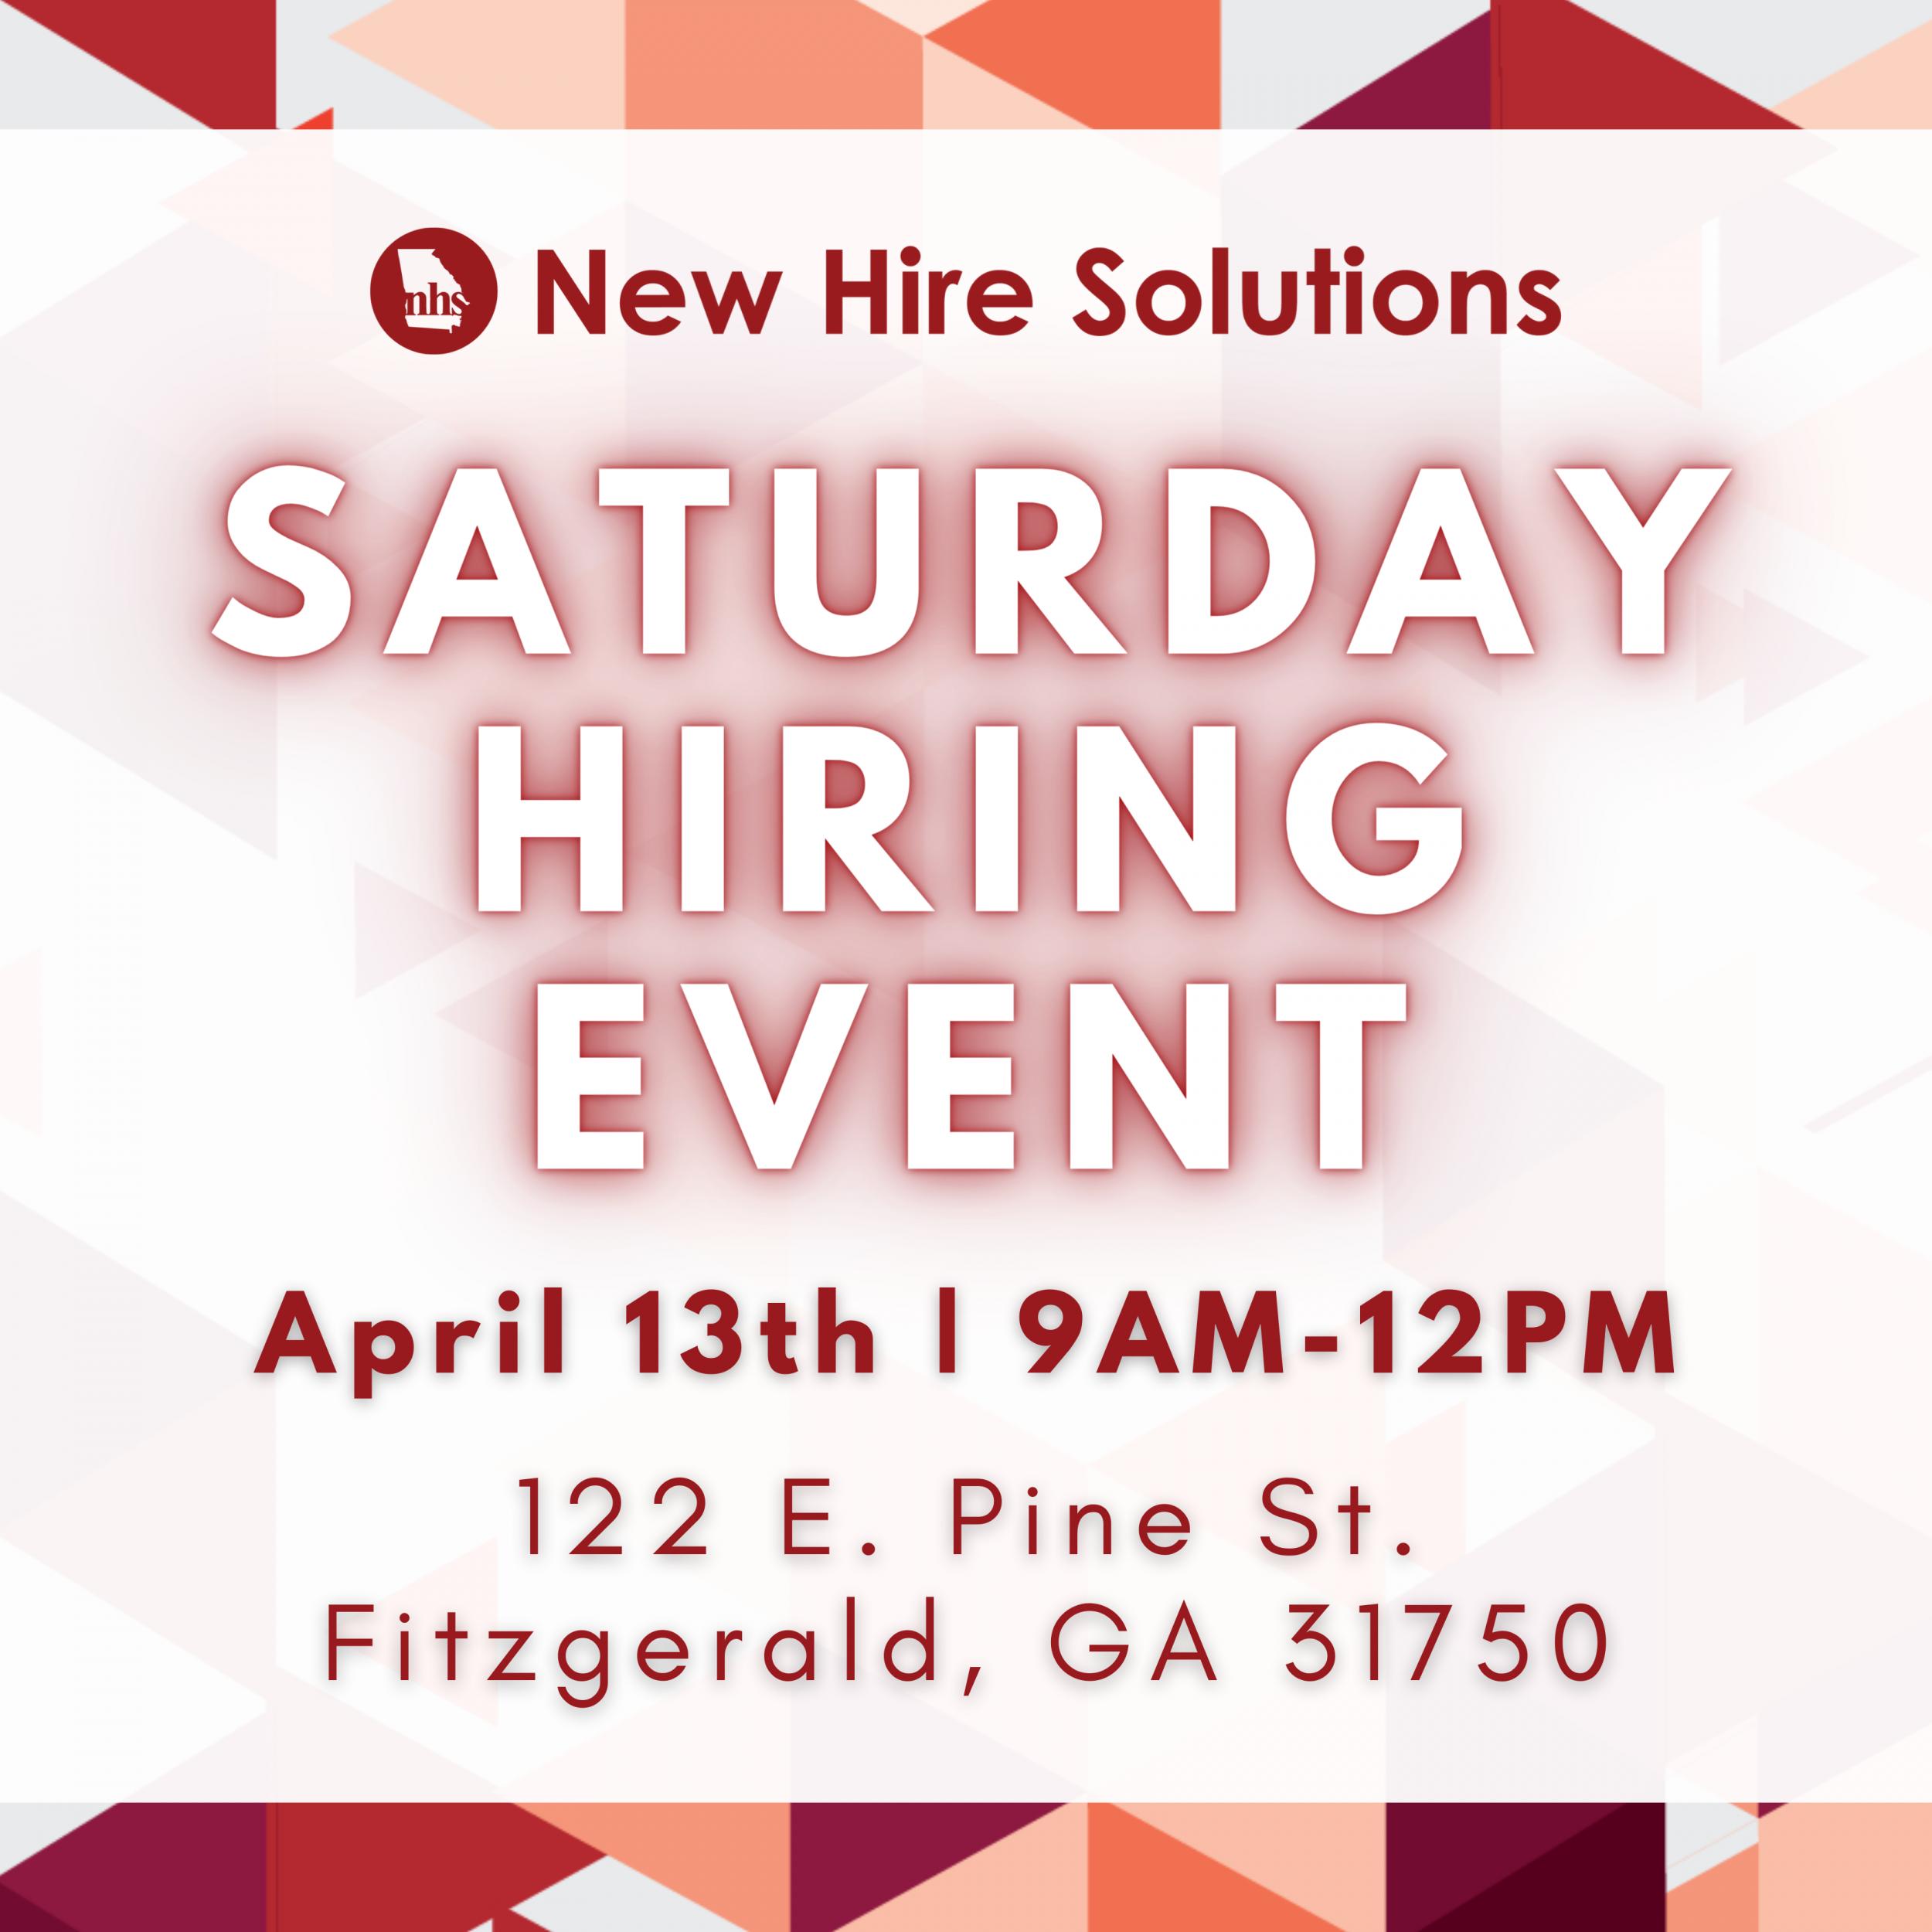 Photo for Fitzgerald SATURDAY Hiring Event 4.13!